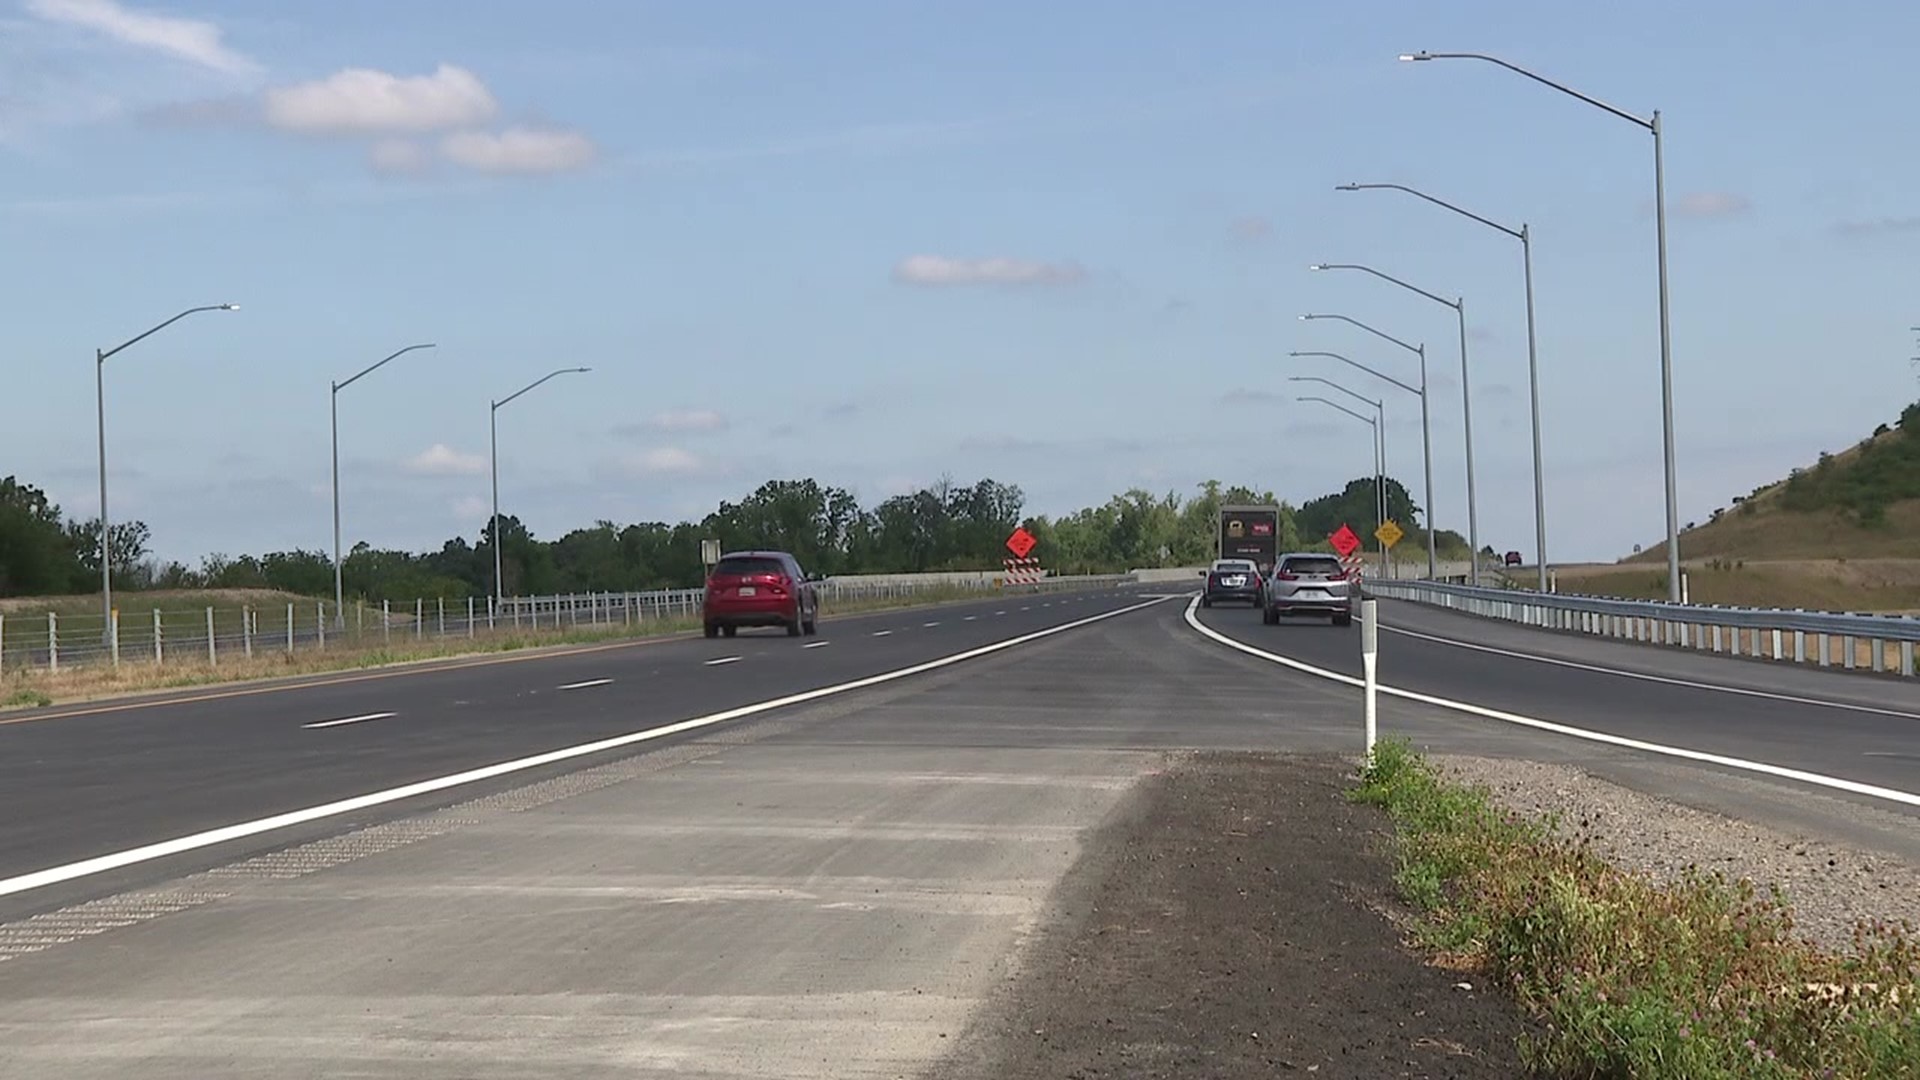 Part of the long-awaited highway project in central PA opened Thursday morning.